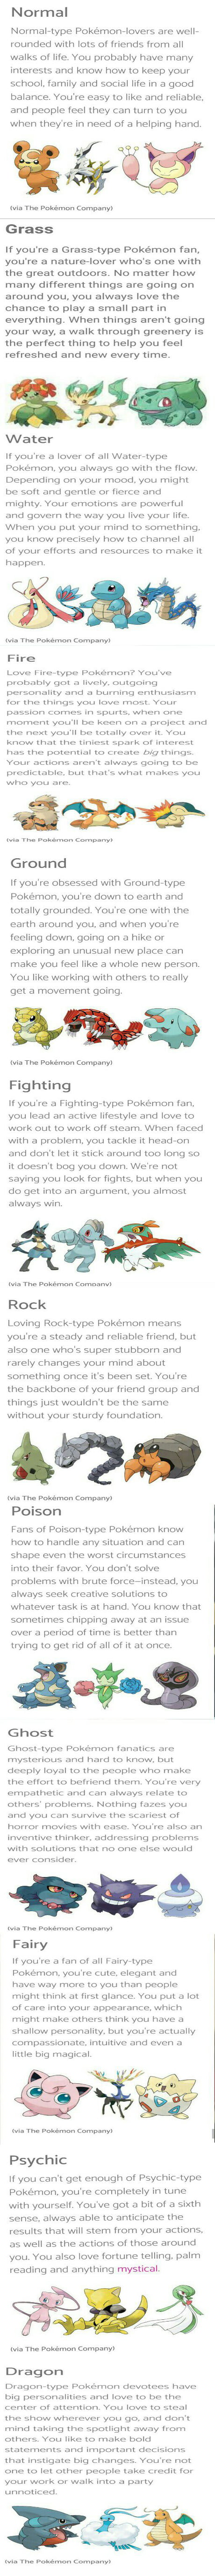 What Your Favourite Pokemon Type Says About You